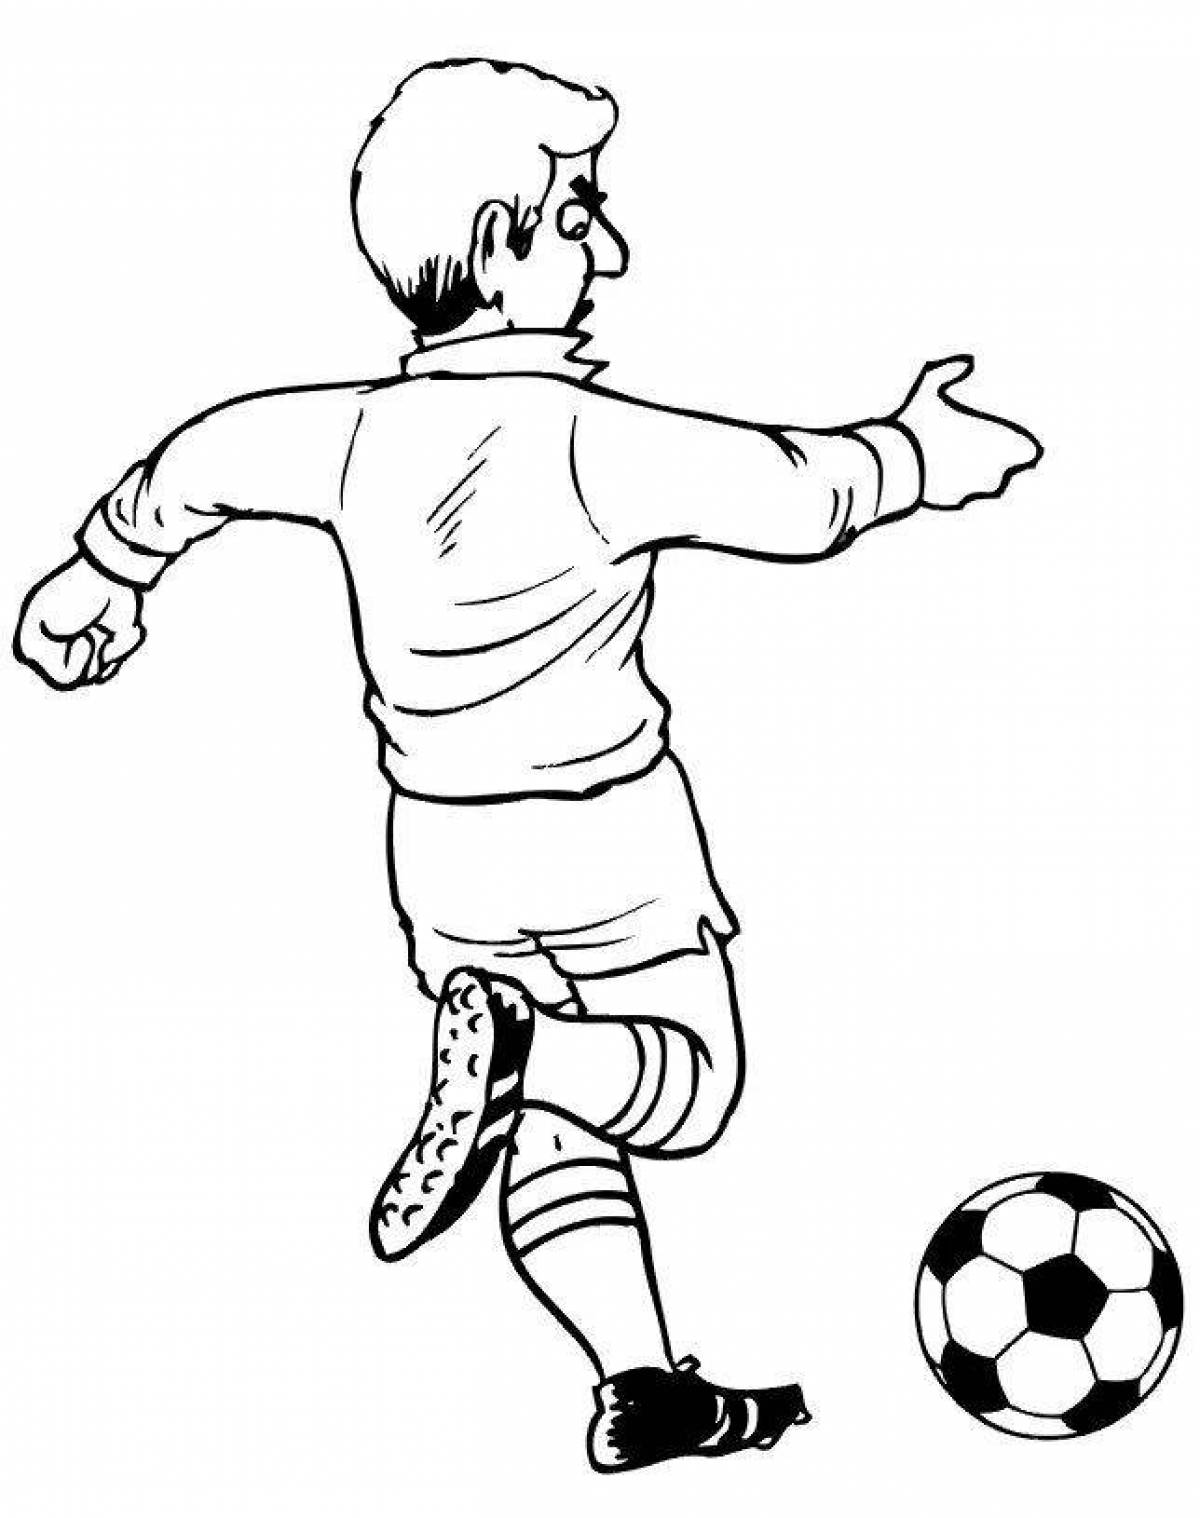 Coloring book shining football player for kids